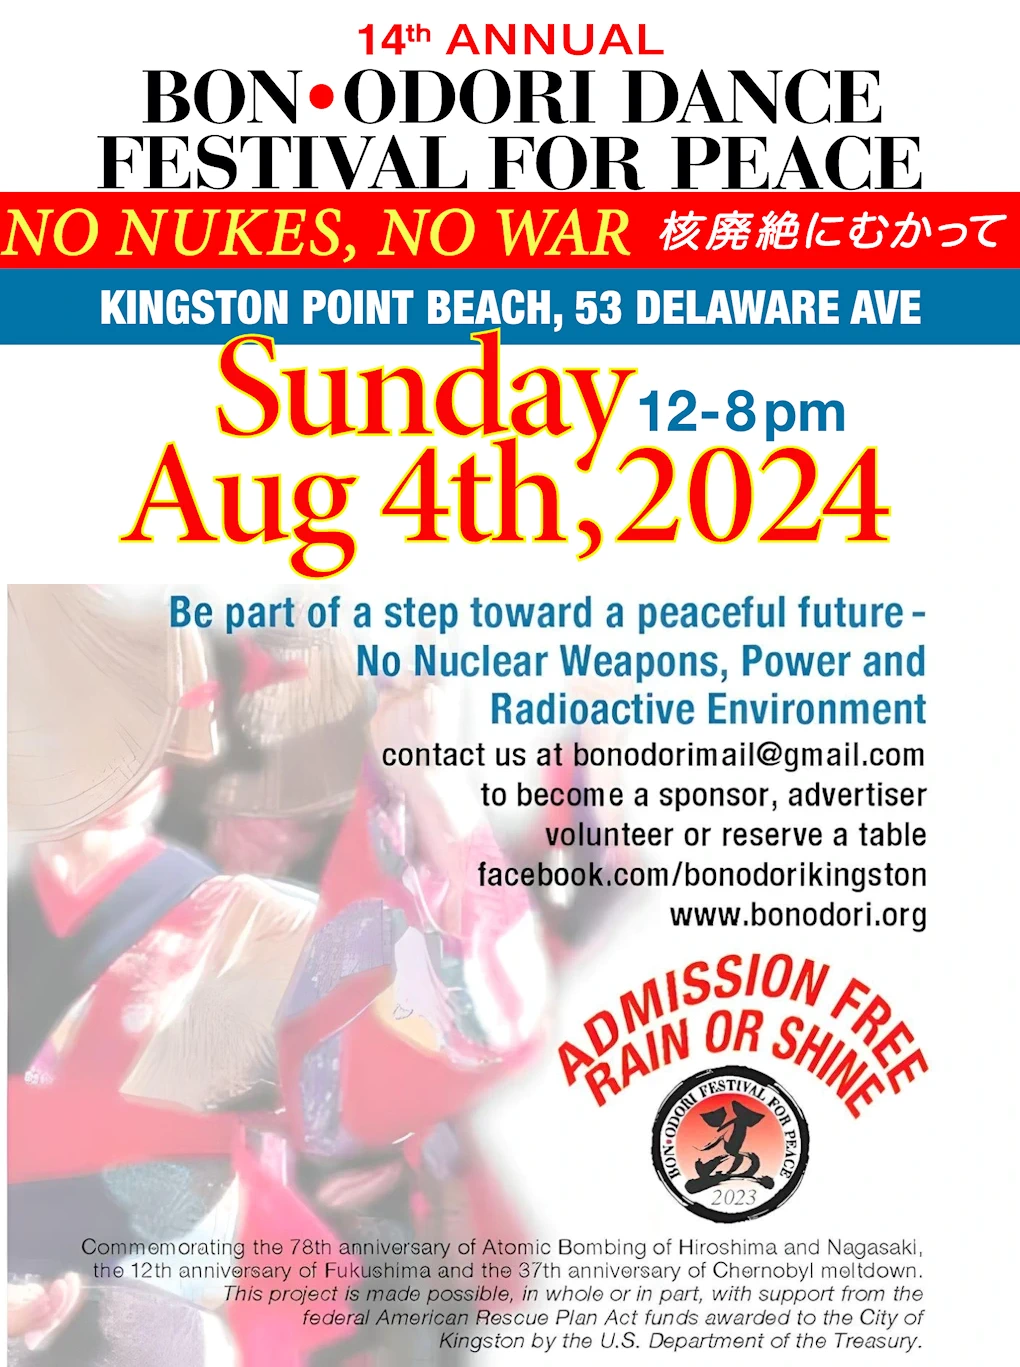 2023 - 13th Annual Bon Odori Dance Festival for Peace - Kingston Point Beach, NYC (Be Part of a Step Toward a Peaceful Future-No Nuclear Weapons)  